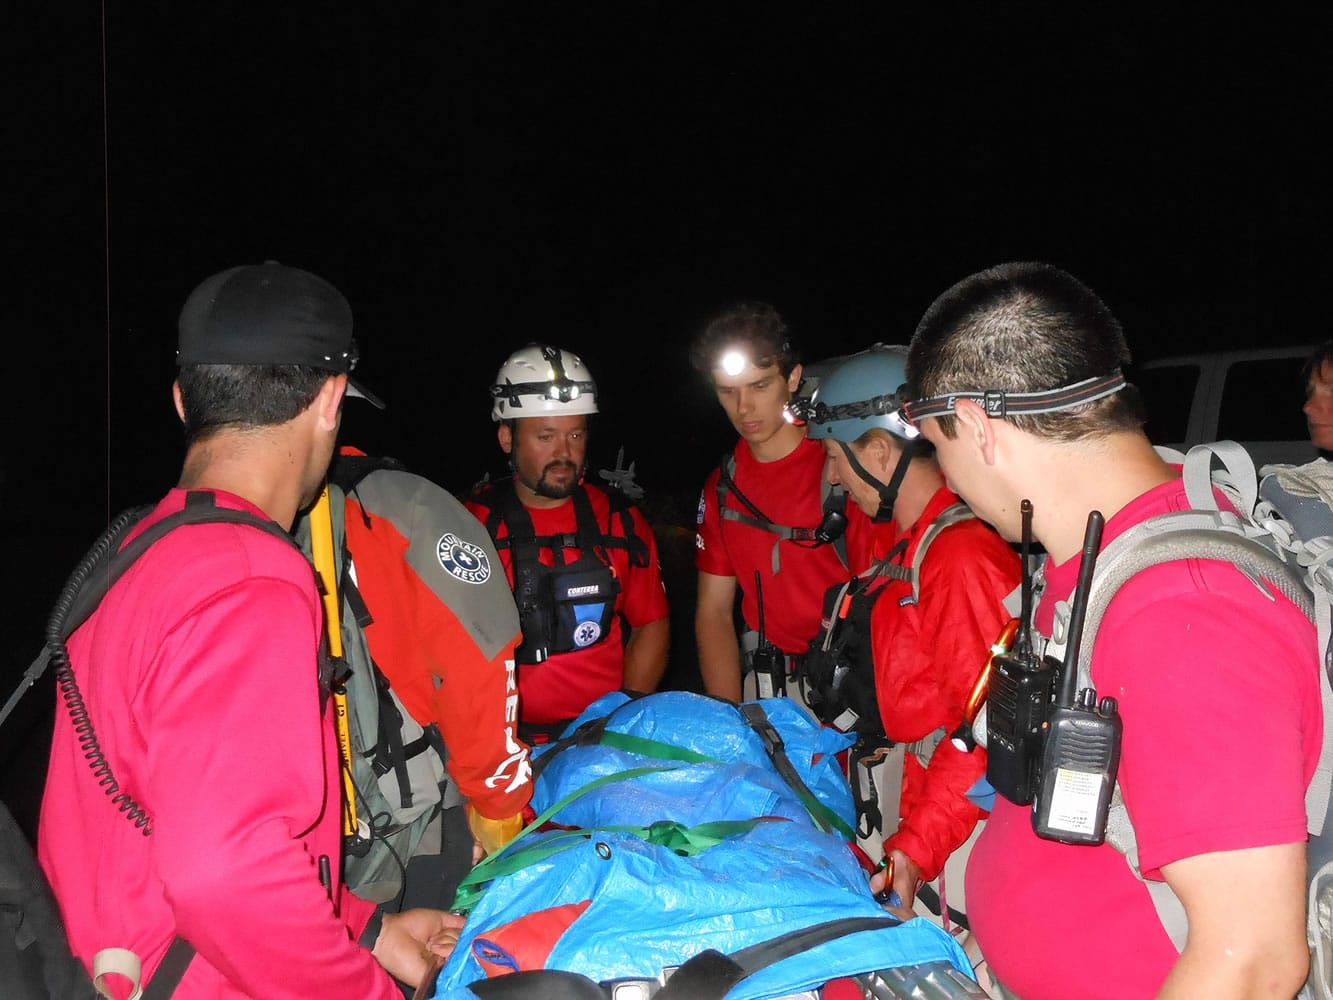 Volcano Rescue Team volunteers deploy on a nighttime mission on Mount St. Helens.